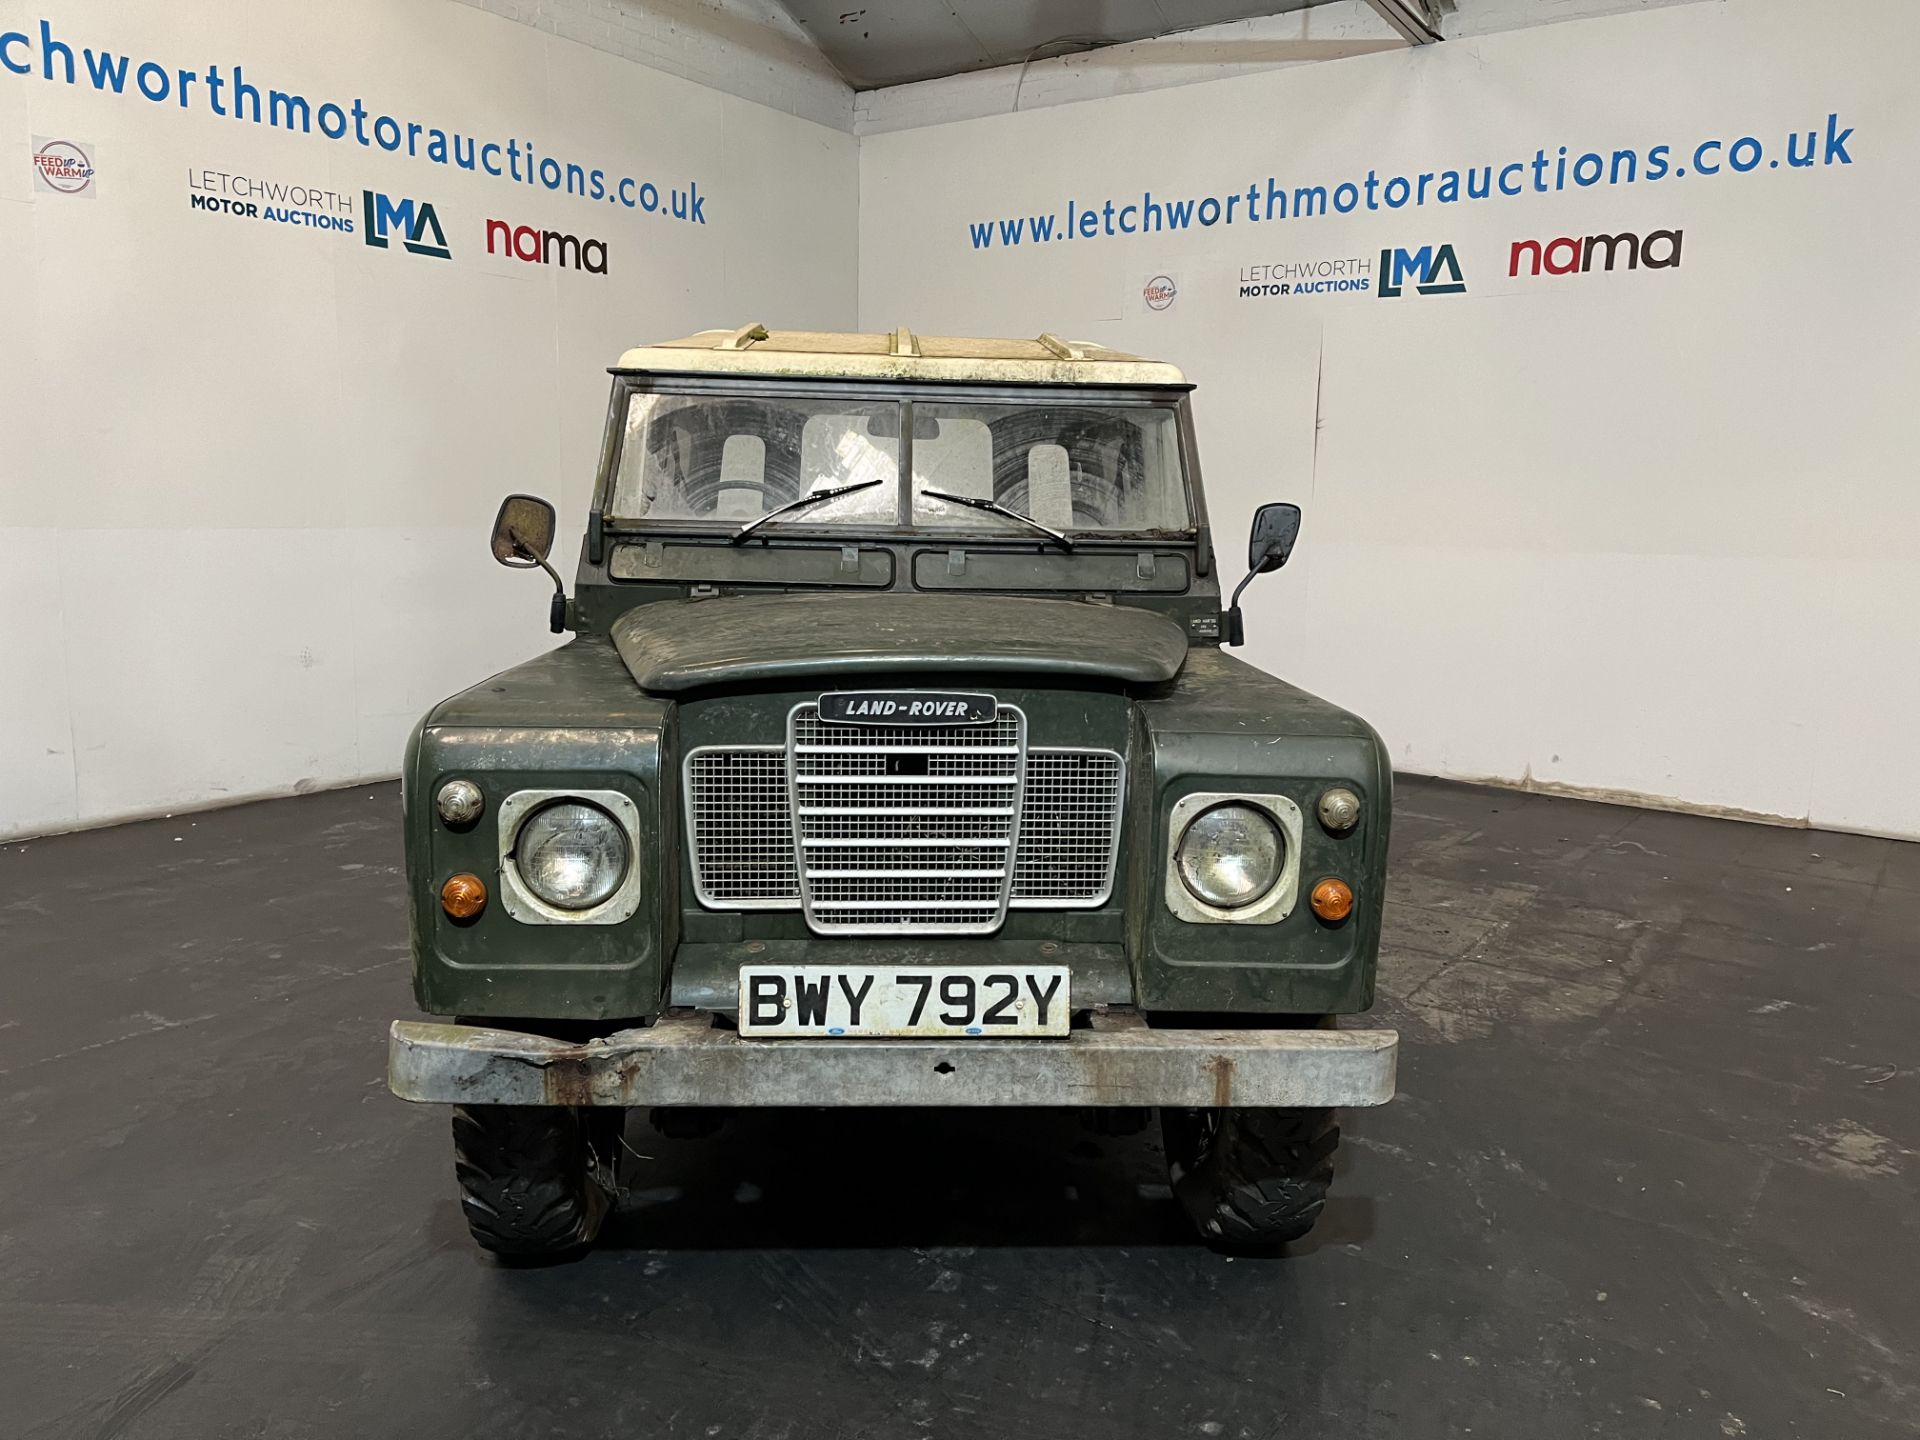 1983 Land Rover 88" - 4 CYL - 2286cc - Image 2 of 16